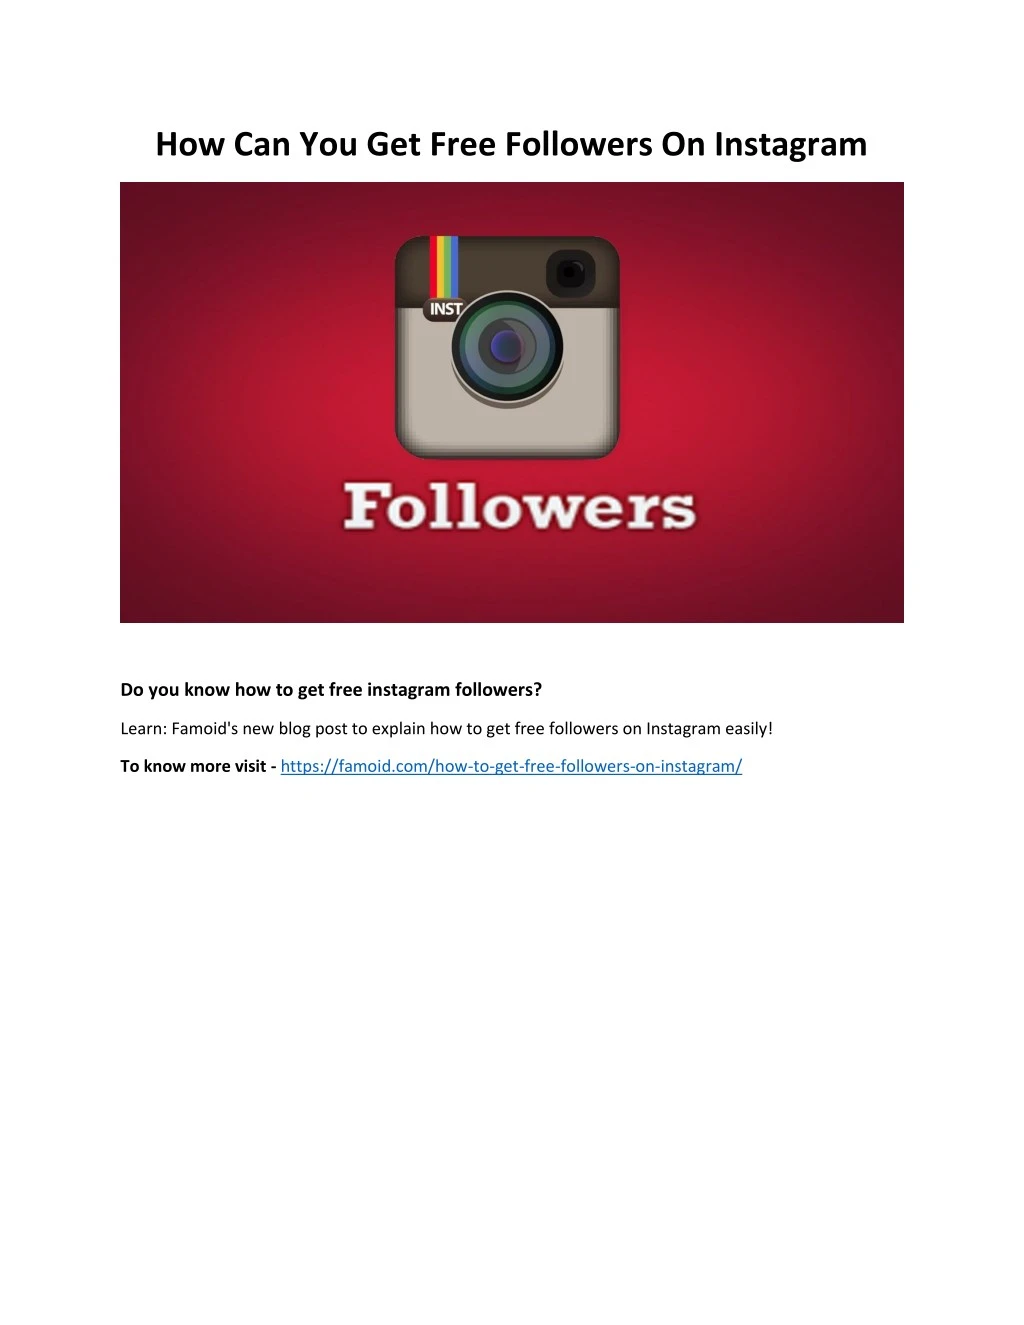 how can you get free followers on instagram